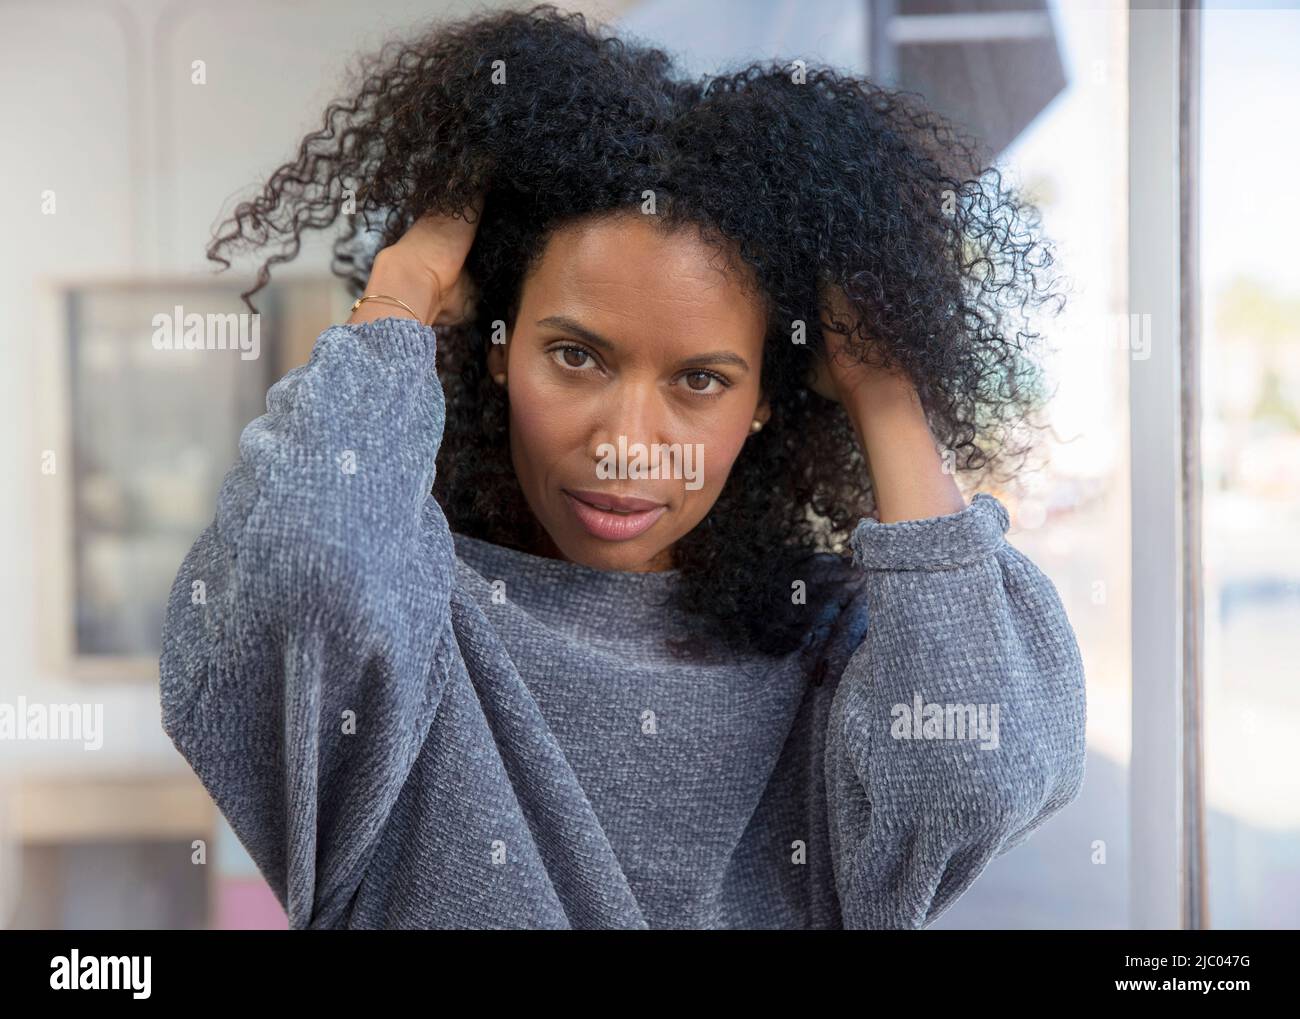 Mixed race, middle-aged woman runs her hands through her hair looking at the camera. Stock Photo